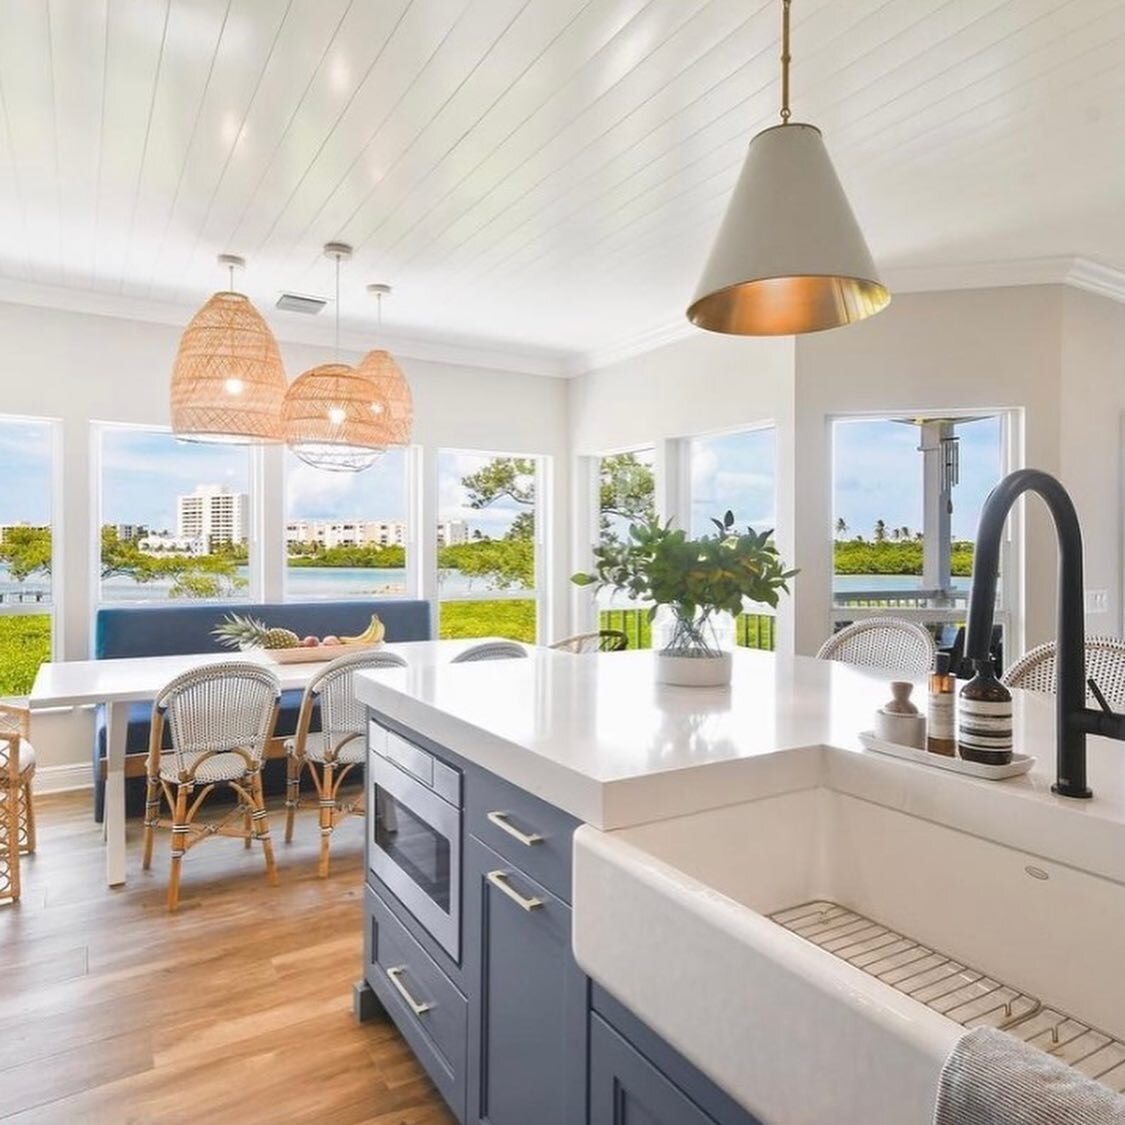 Please check out Rachel &amp; Kyle&rsquo;s beautiful home they&rsquo;ve been working on!  @projectseagrove is definitely one to follow!!! 

Every room and even color of the exterior of their home is simply perfection!  I love it all!

Enjoy my friend